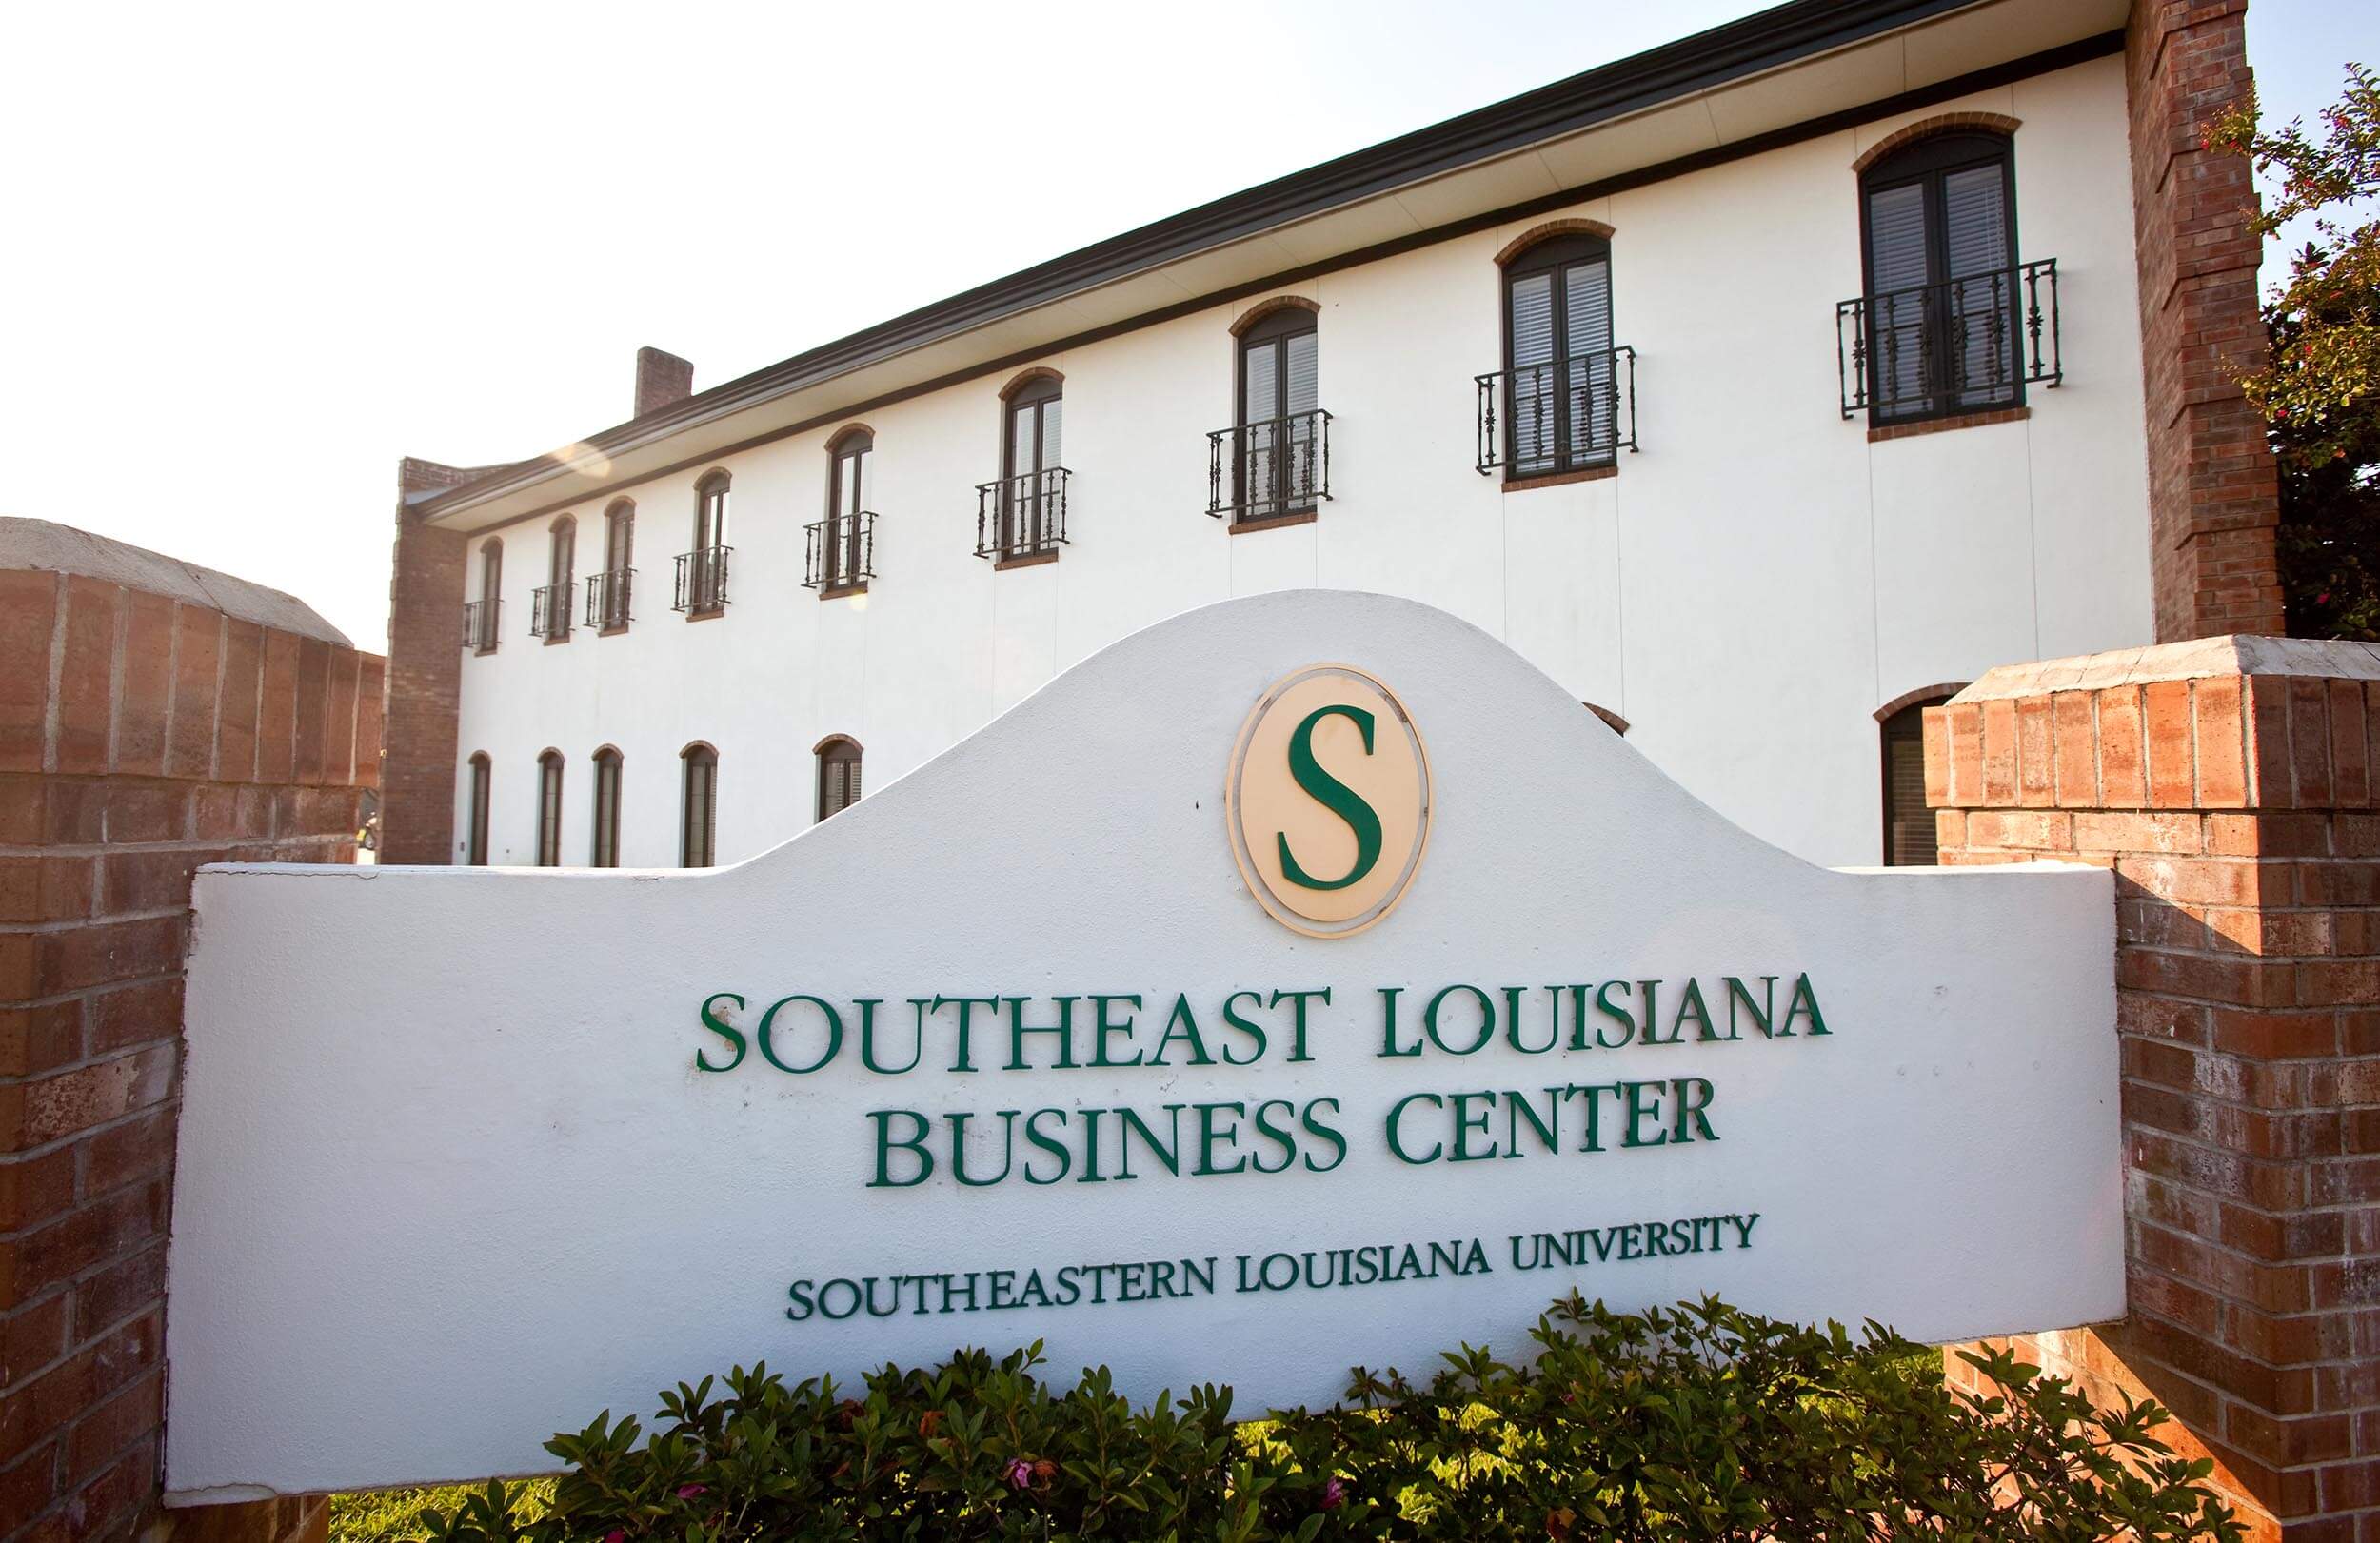 The entrance sign for the Southeast Louisian Business Center in the Tangipahoa parish